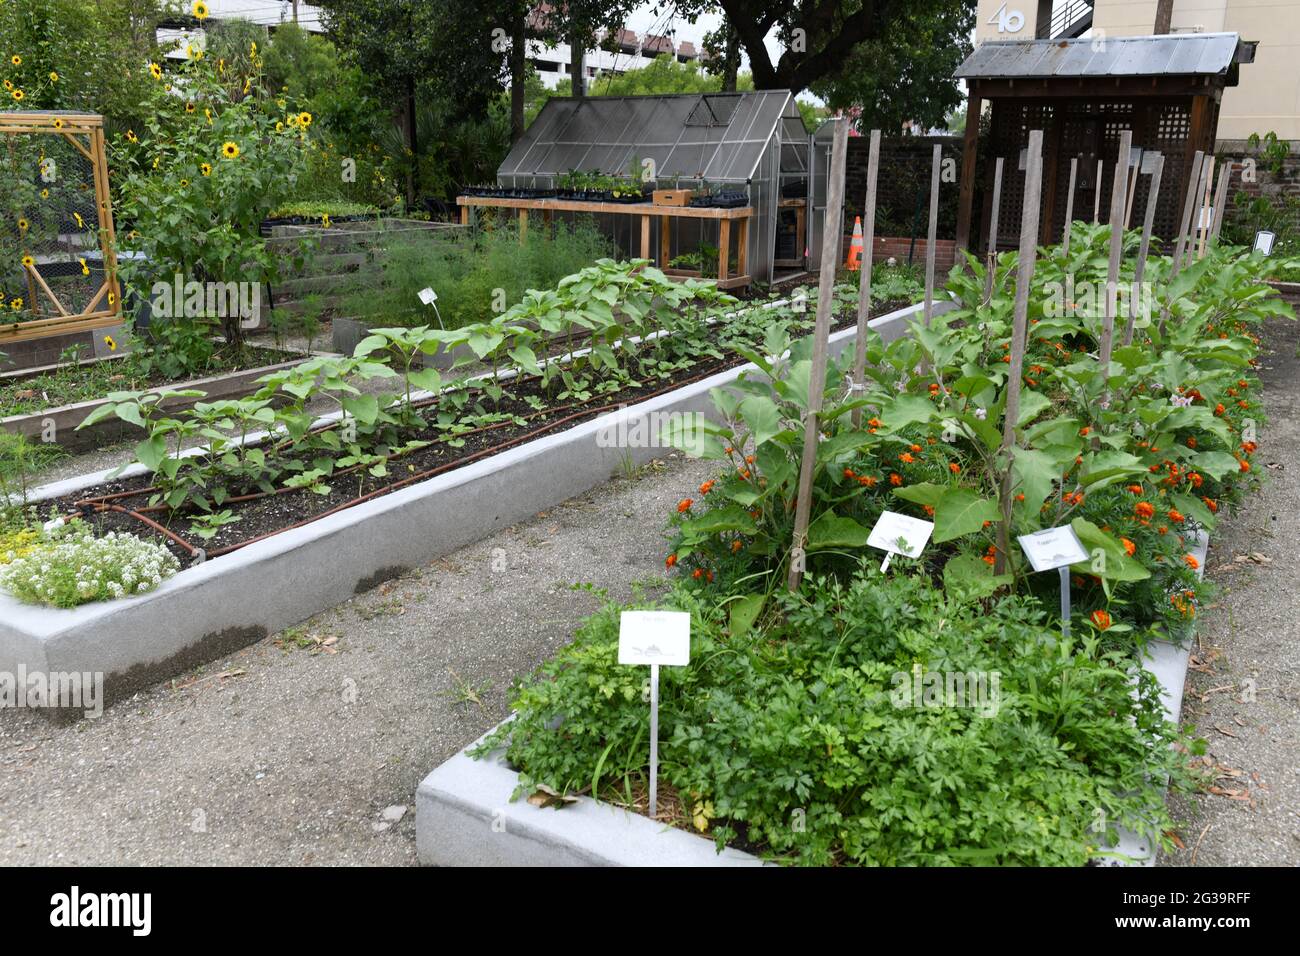 urban garden which is maintainwd by volunteers and donations. Stock Photo